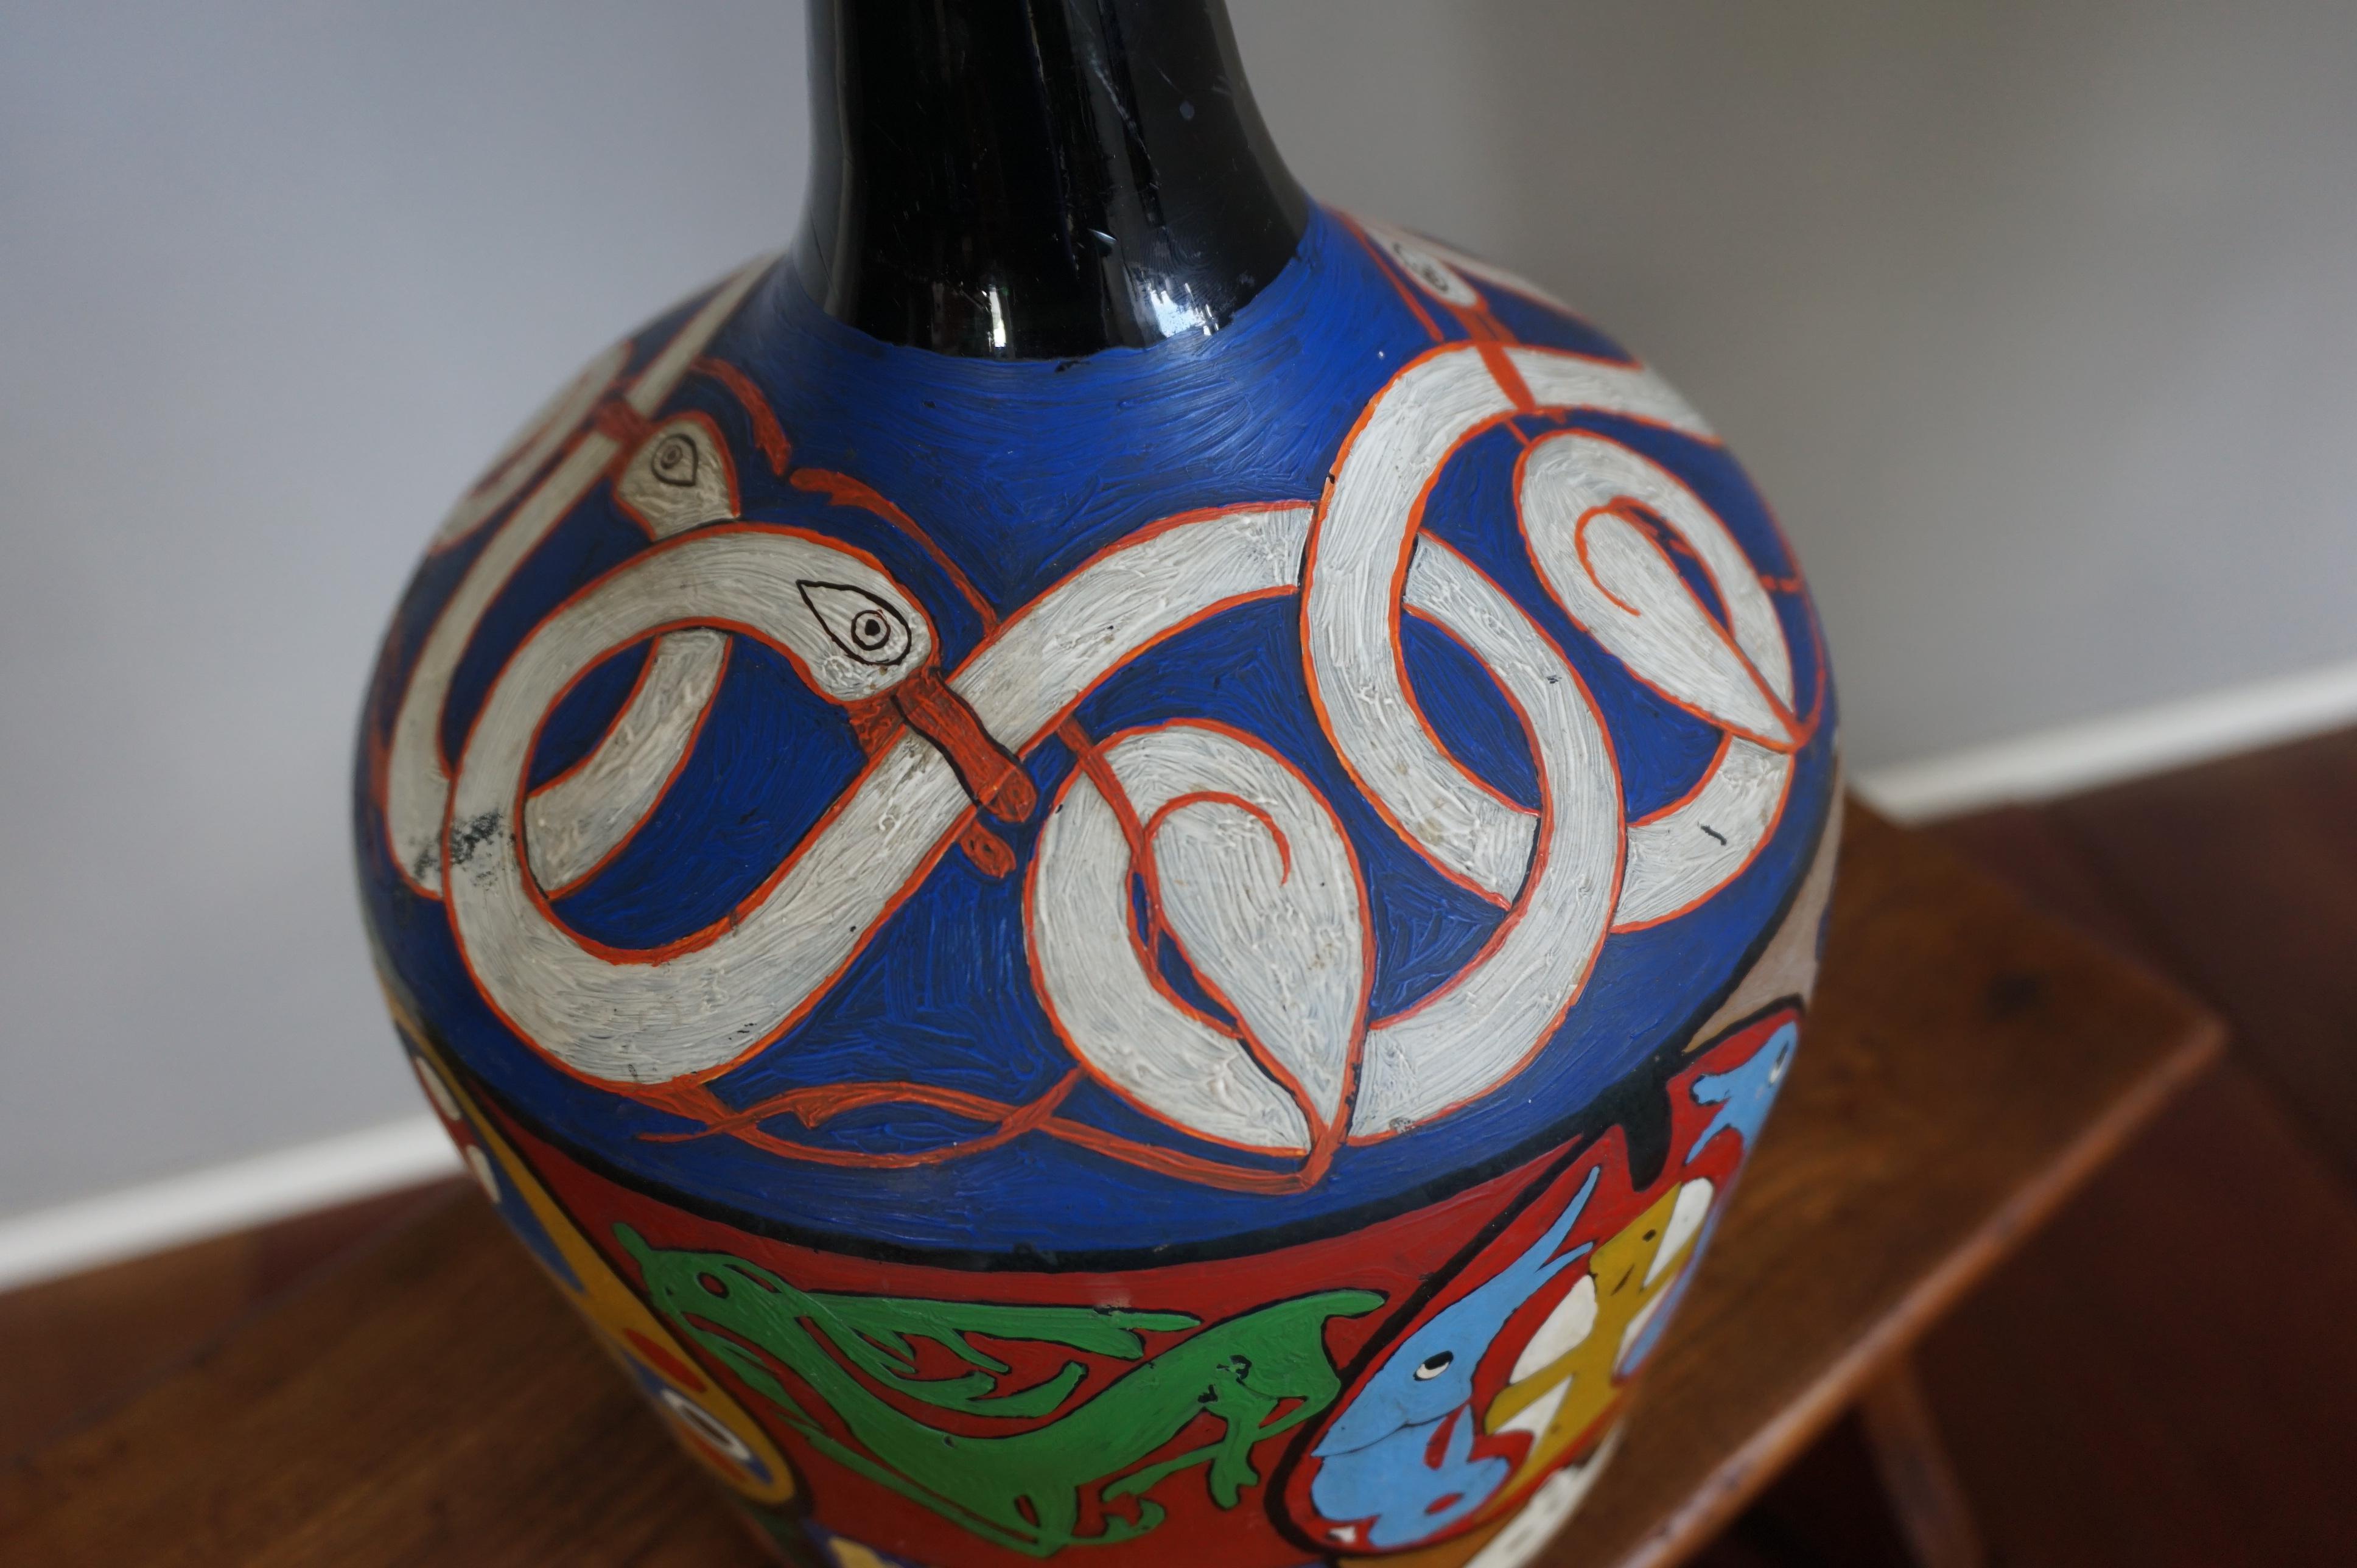 20th Century Decorative and Artistic Hand-Painted Bottle Folk Art with Colorful Symbolism For Sale